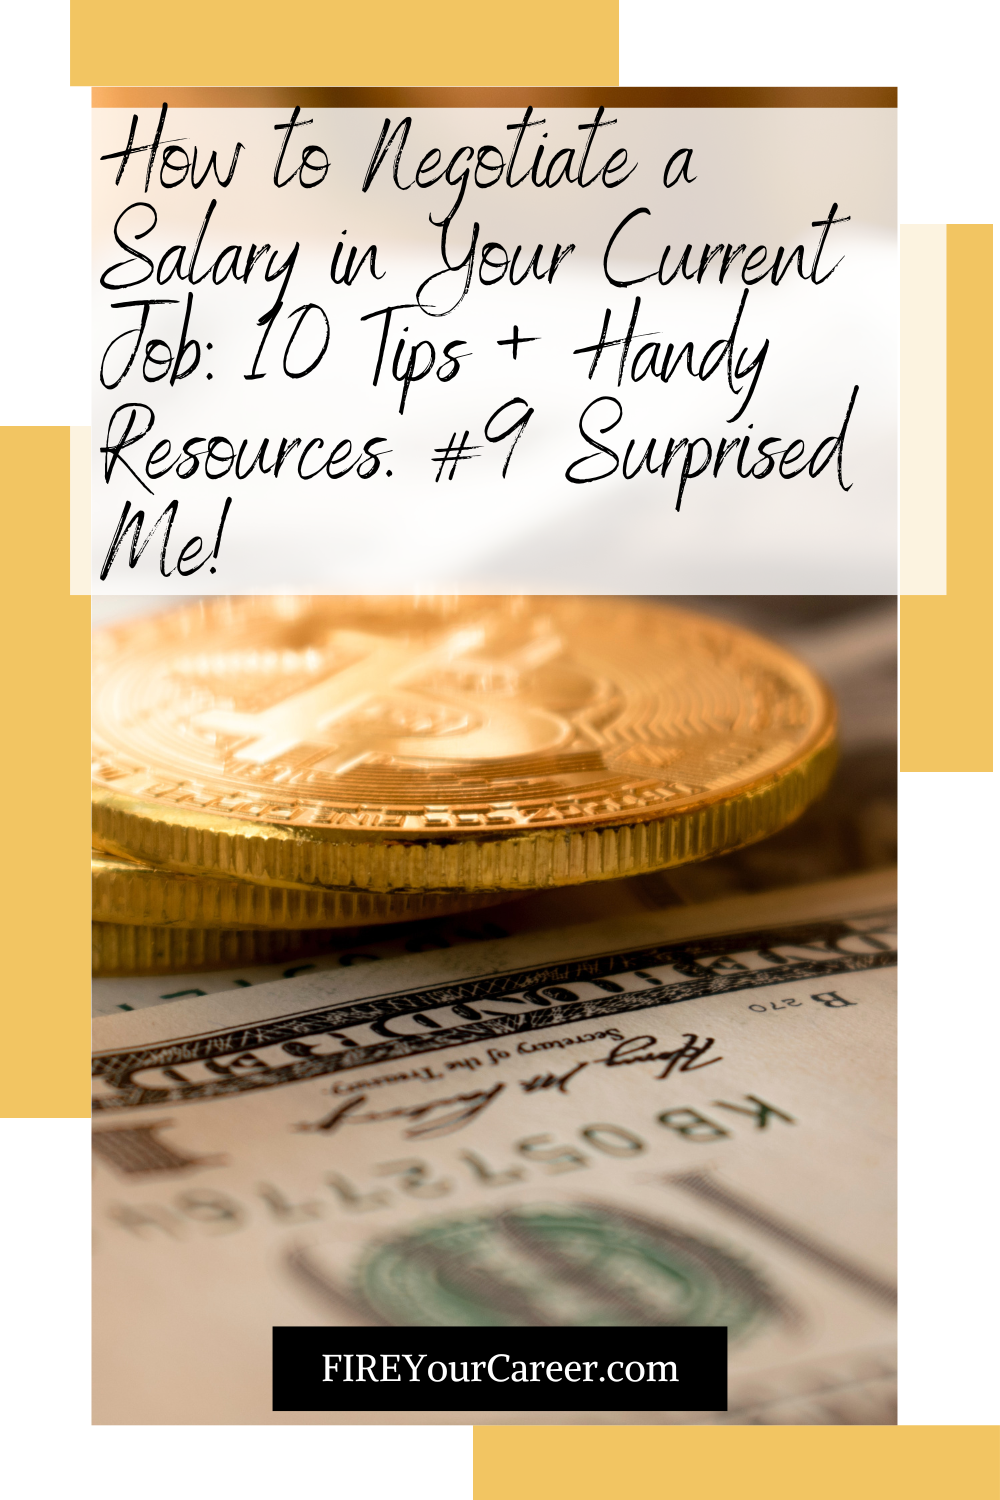 How to Negotiate a Salary in Your Current Job 10 Tips + Handy Resources. #9 Surprised Me! Pinterest